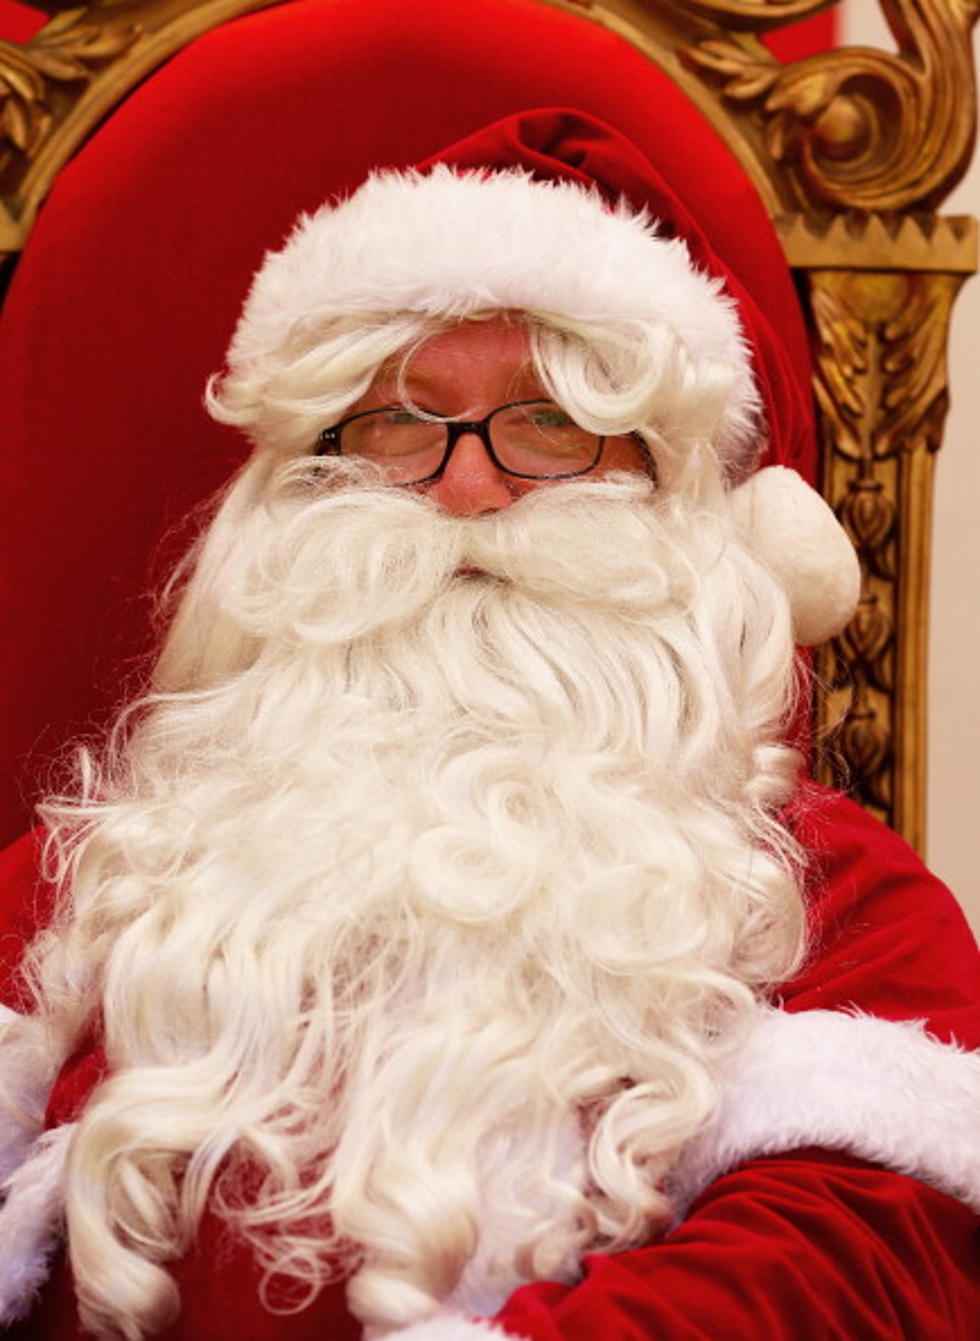 Santa Land Opens with New Attractions [Audio]